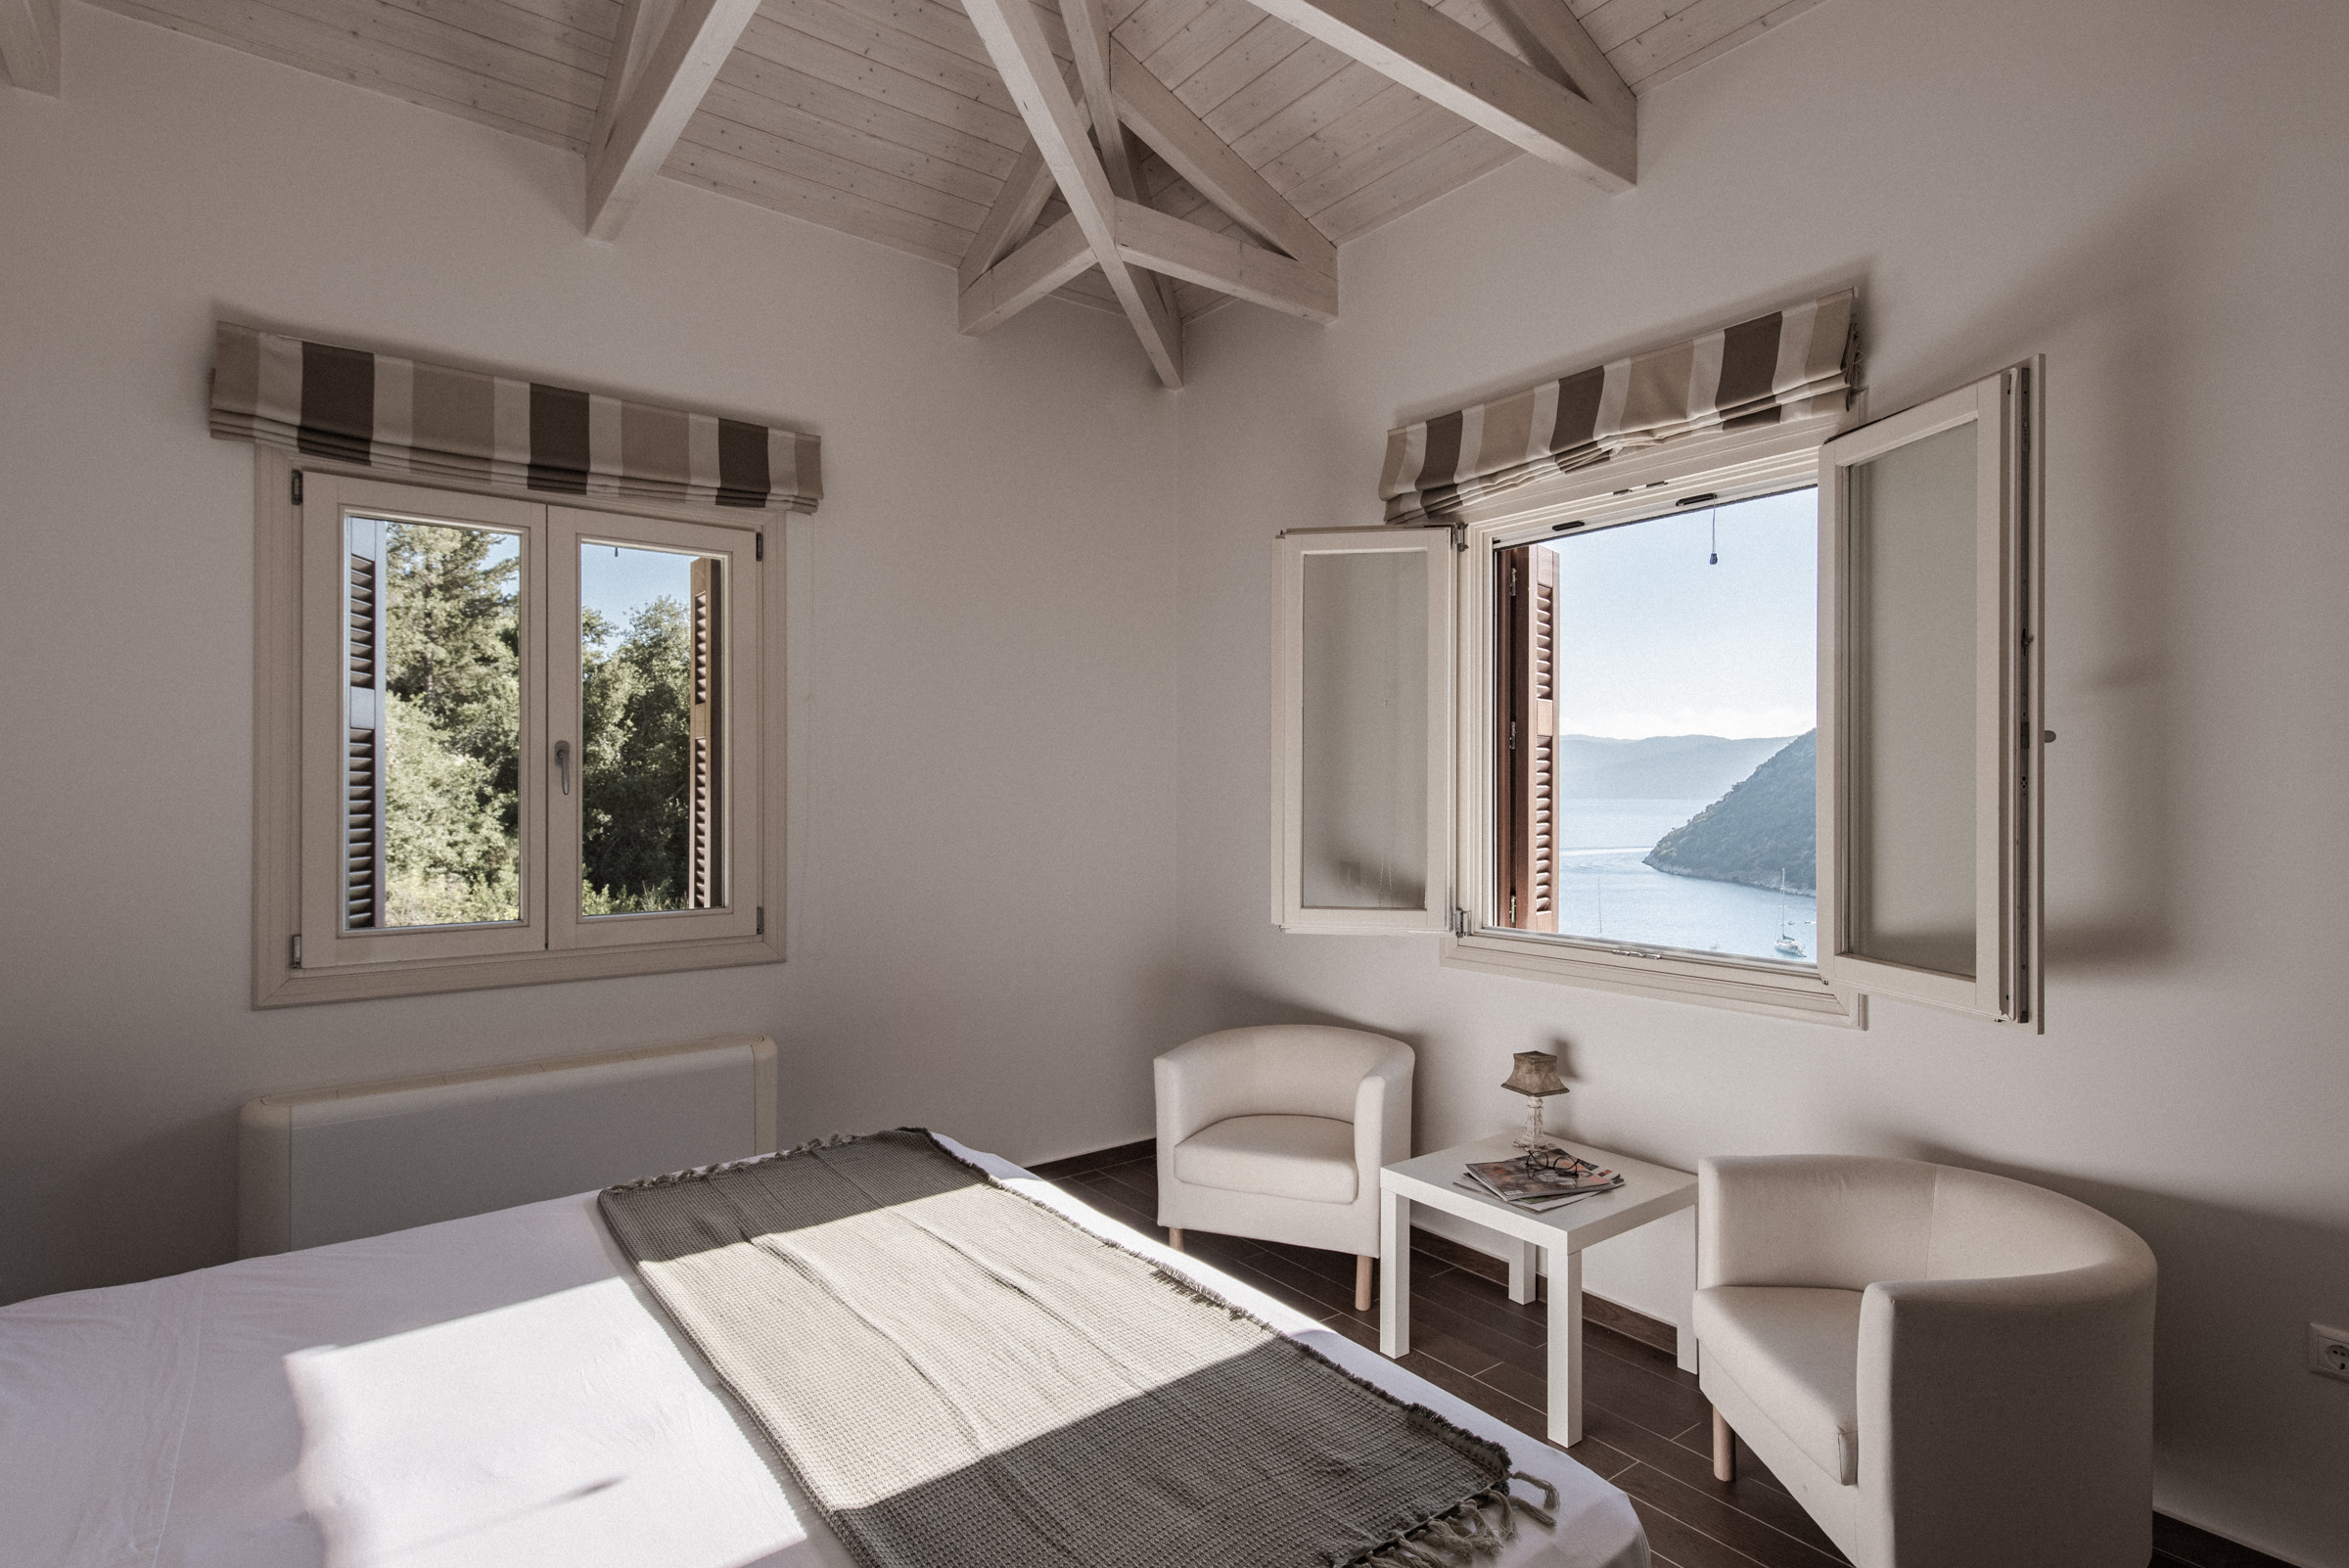 Bedroom of villa for rent on Ithaca Greece, Stavros